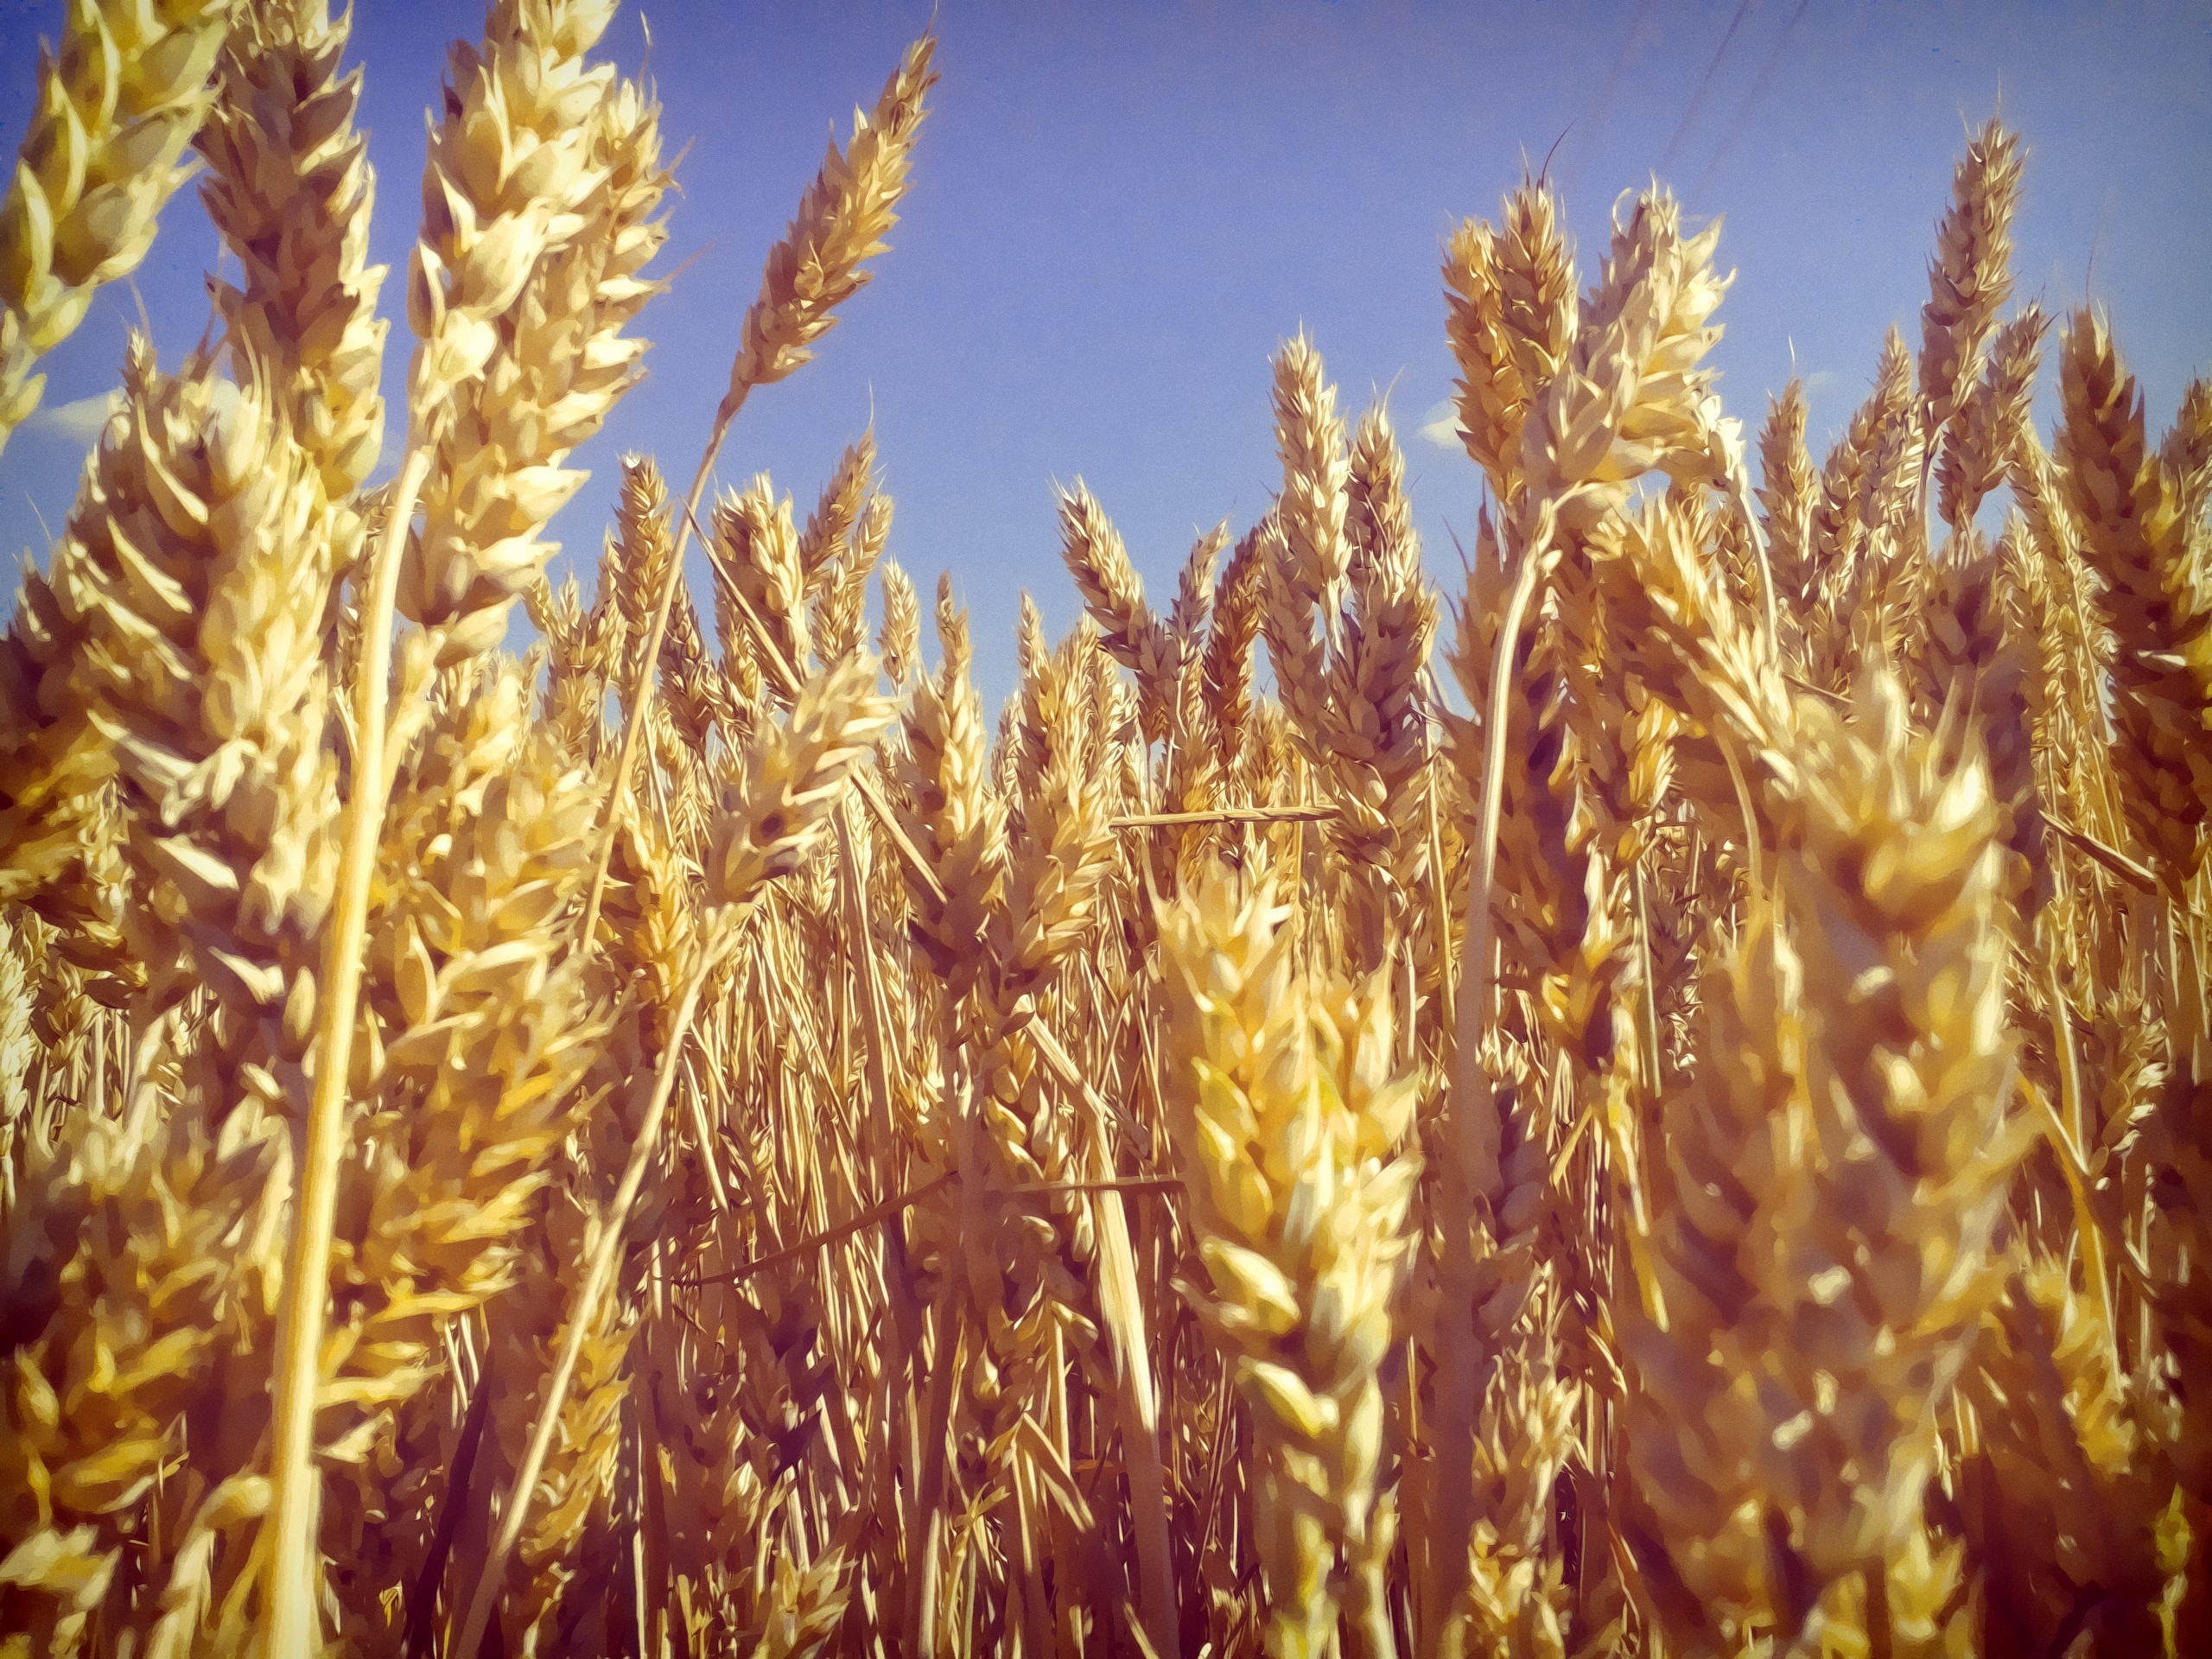 General 2560x1920 wheat plants outdoors Agro (Plants)